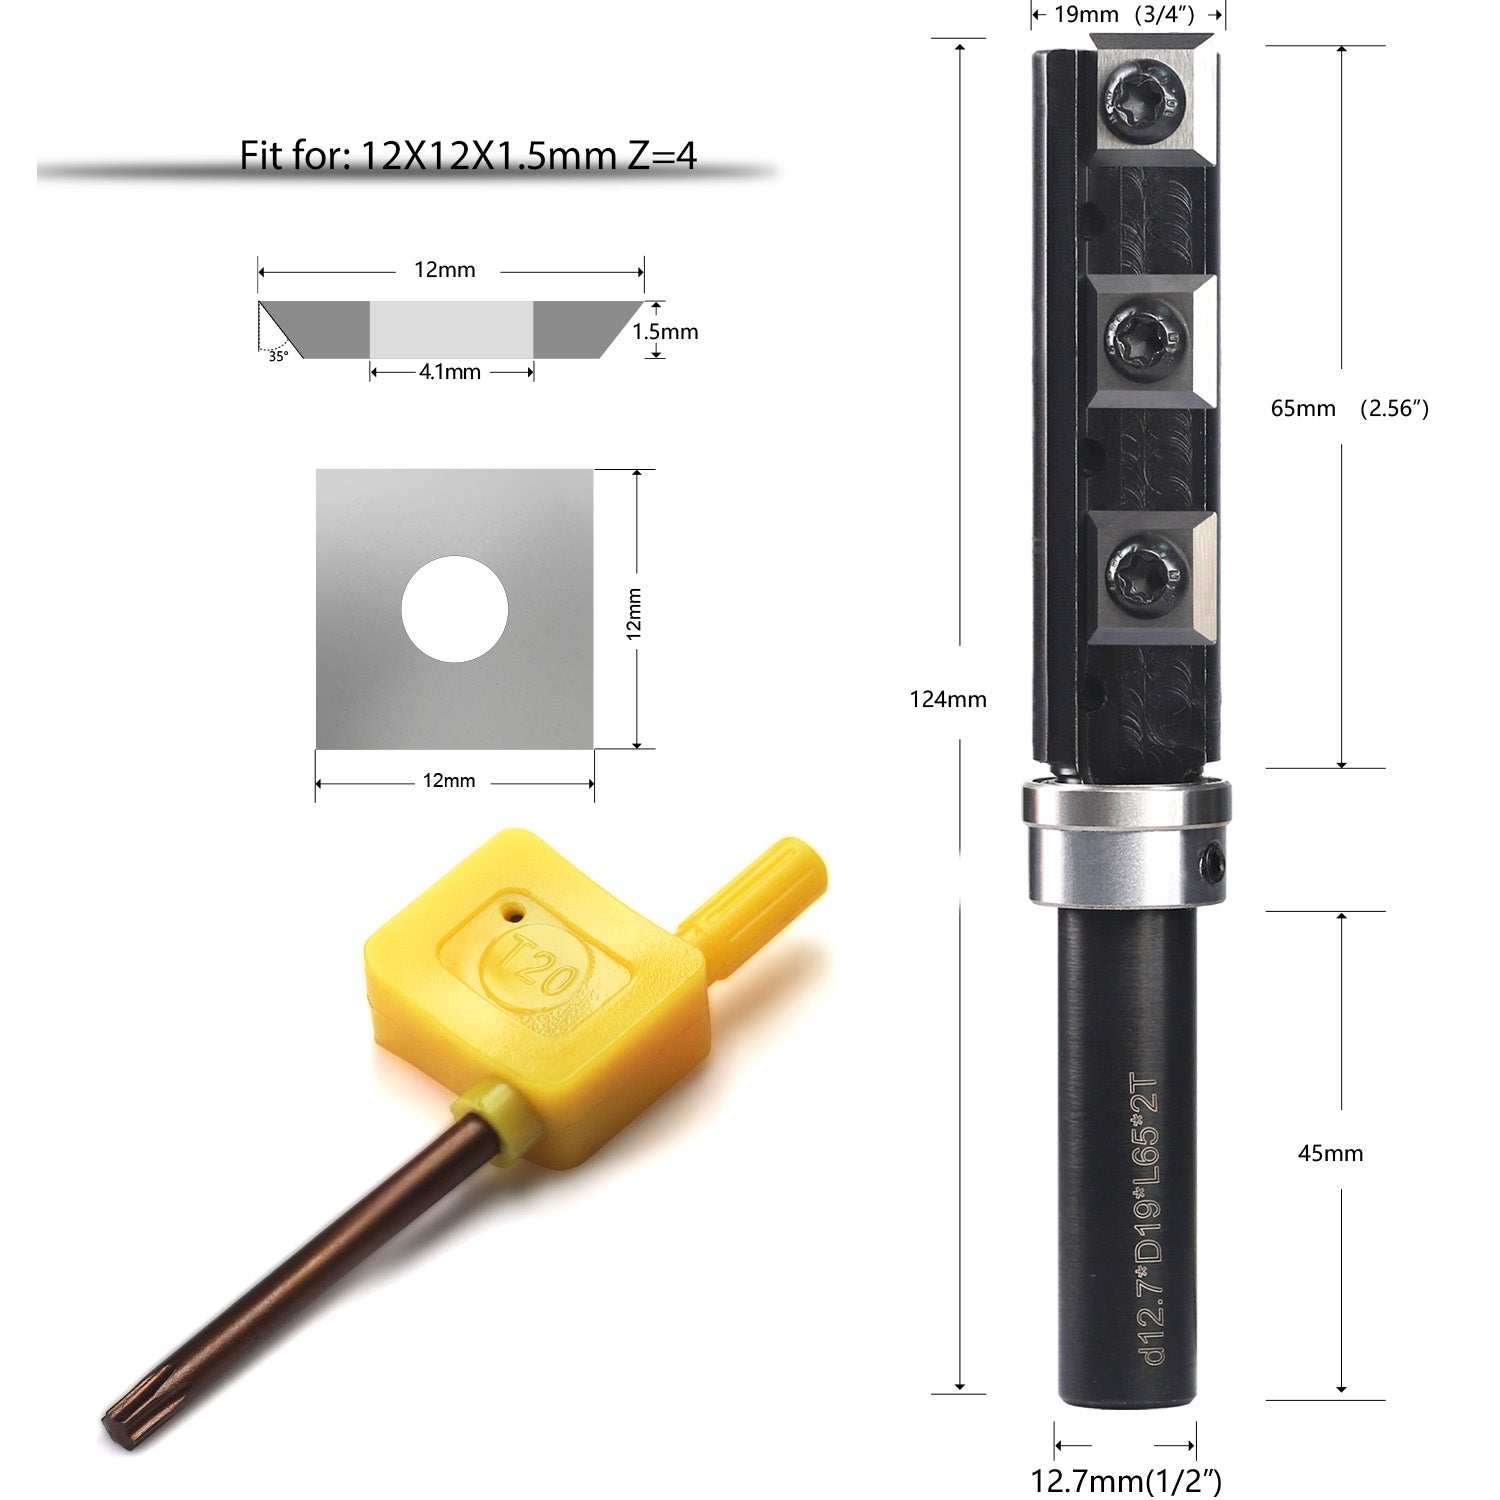 yeptooling top bearing flush trim router bit with 6 pieces carbide inserts, 1/2 inch 12.7 mm shank diameter, 3/4 inch 19 mm cutting diameter, 2.56 inch 65 mm cutting length, 4-9/10 inch 124 mm overall length